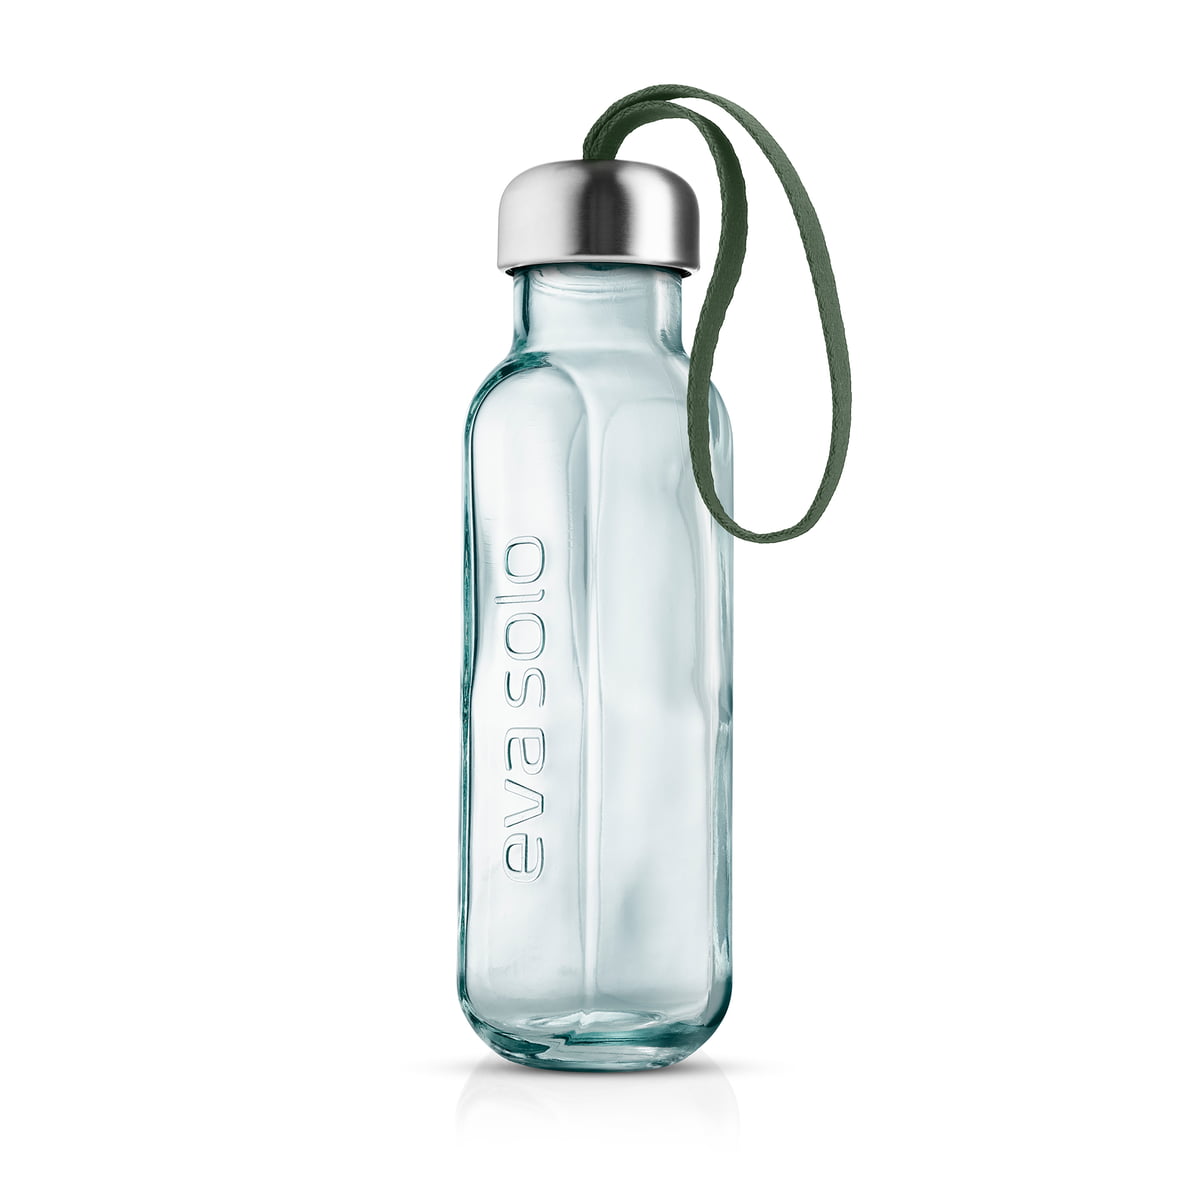 Eva Solo - Recycled glass drinking bottle, 0,5 L - Green (541050)